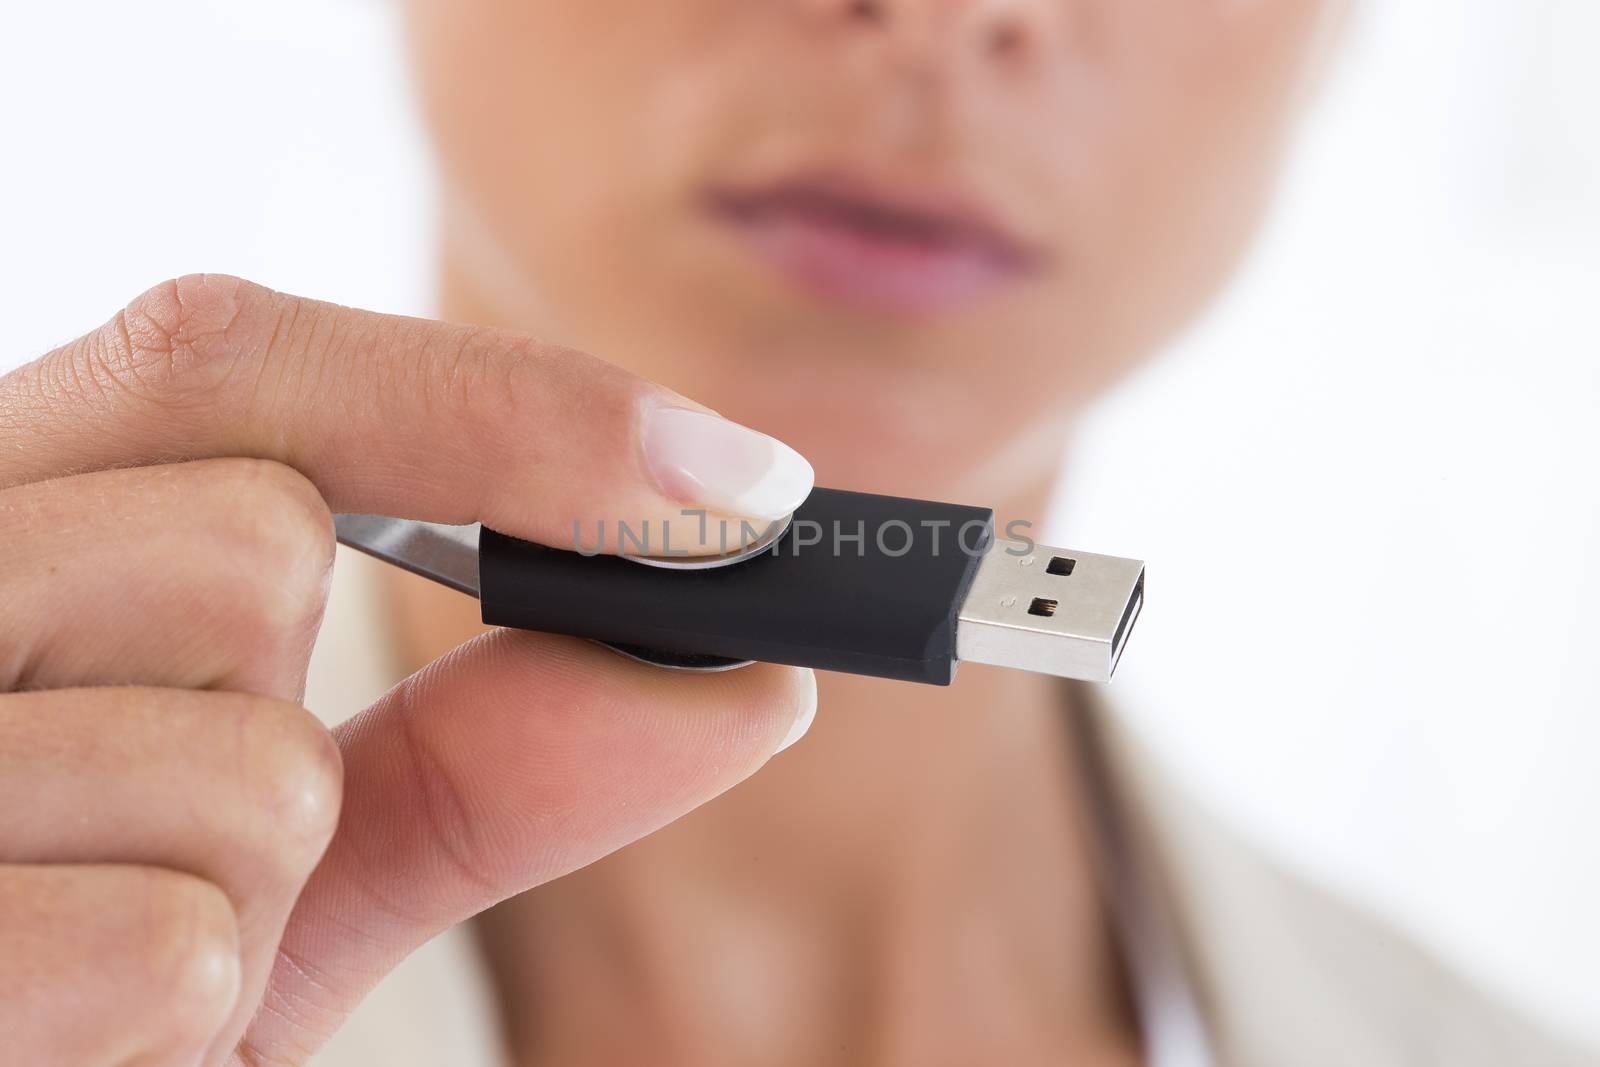 Flash drive ior USB key n a hand of the woman by JPC-PROD